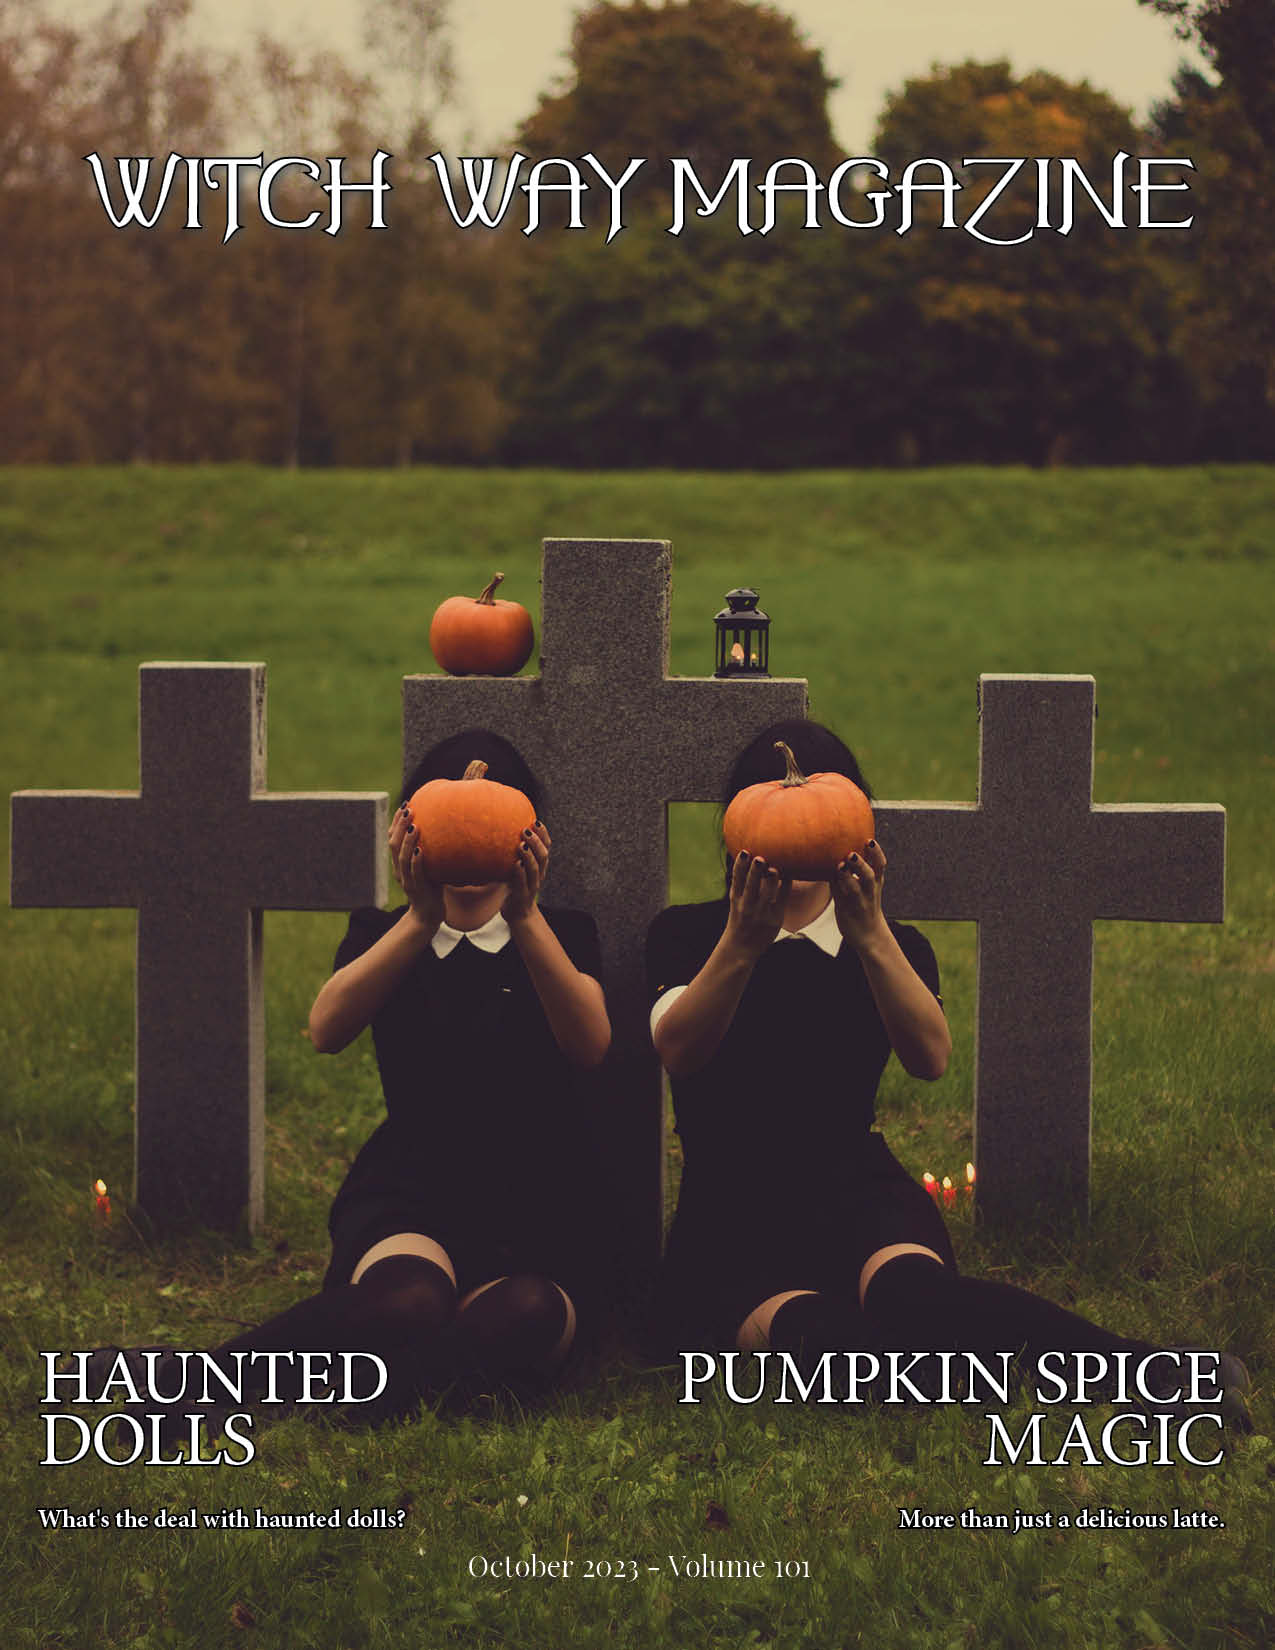 October 2023 Vol #101 - Witch Way Magazine - Issue - Digital Issue